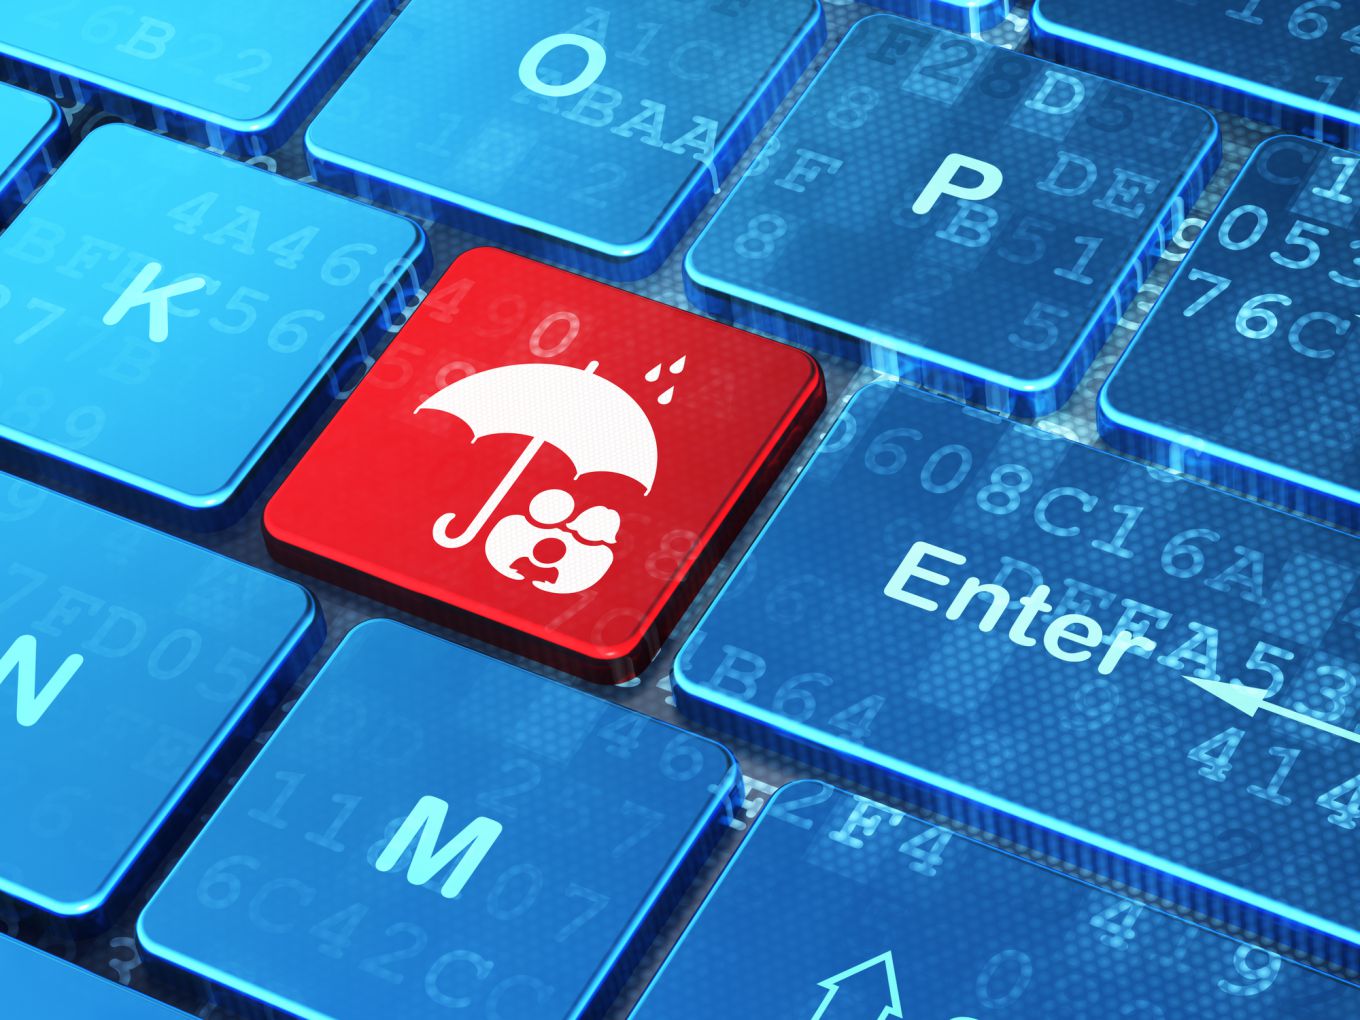 Why Plug And Play Under One Umbrella